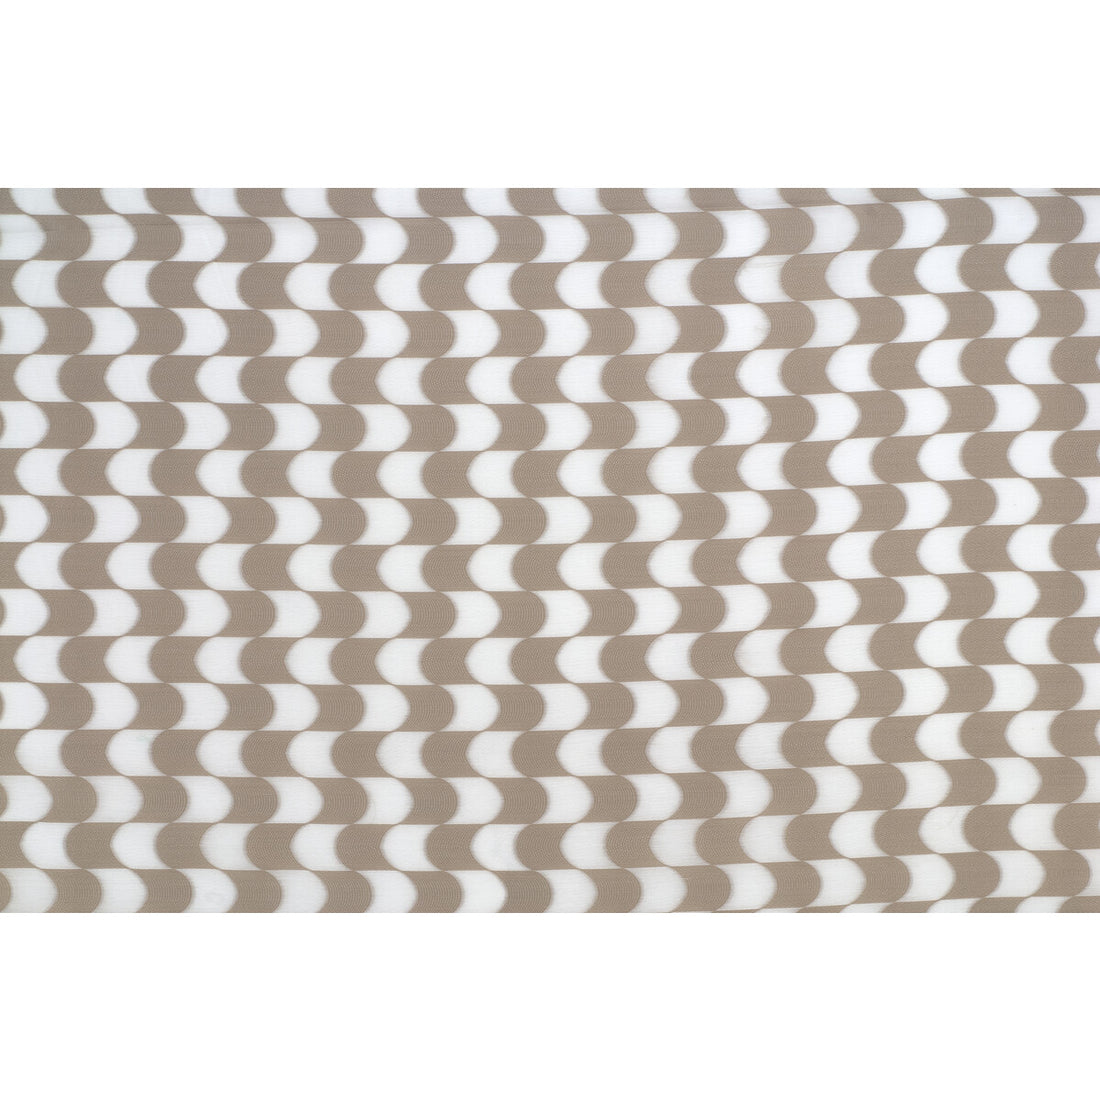 Celina fabric in bronze color - pattern 4285.16.0 - by Kravet Contract